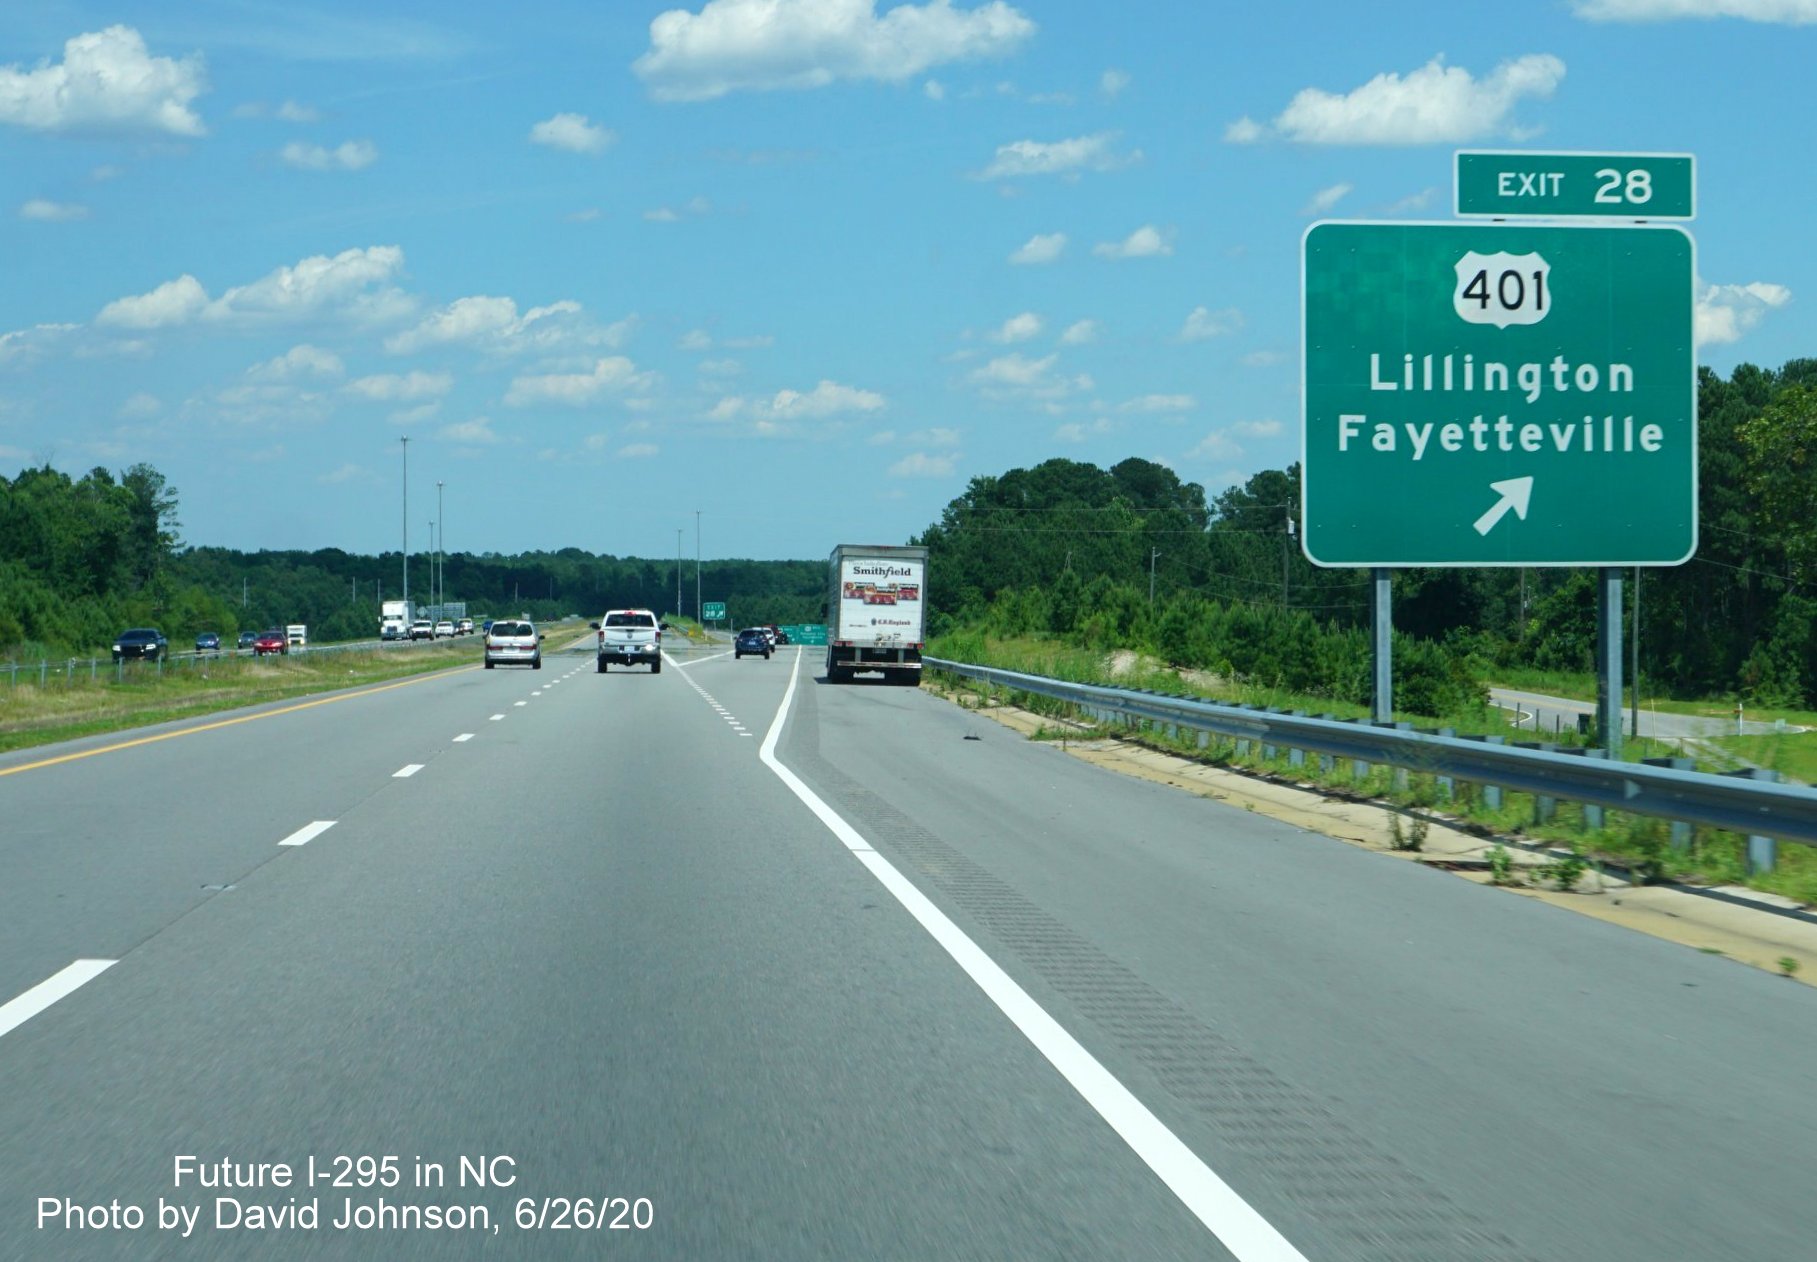 Image of the ground mounted ramp sign for the US 401 exit on I-295 North in Fayetteville, by David Johnson June 2020